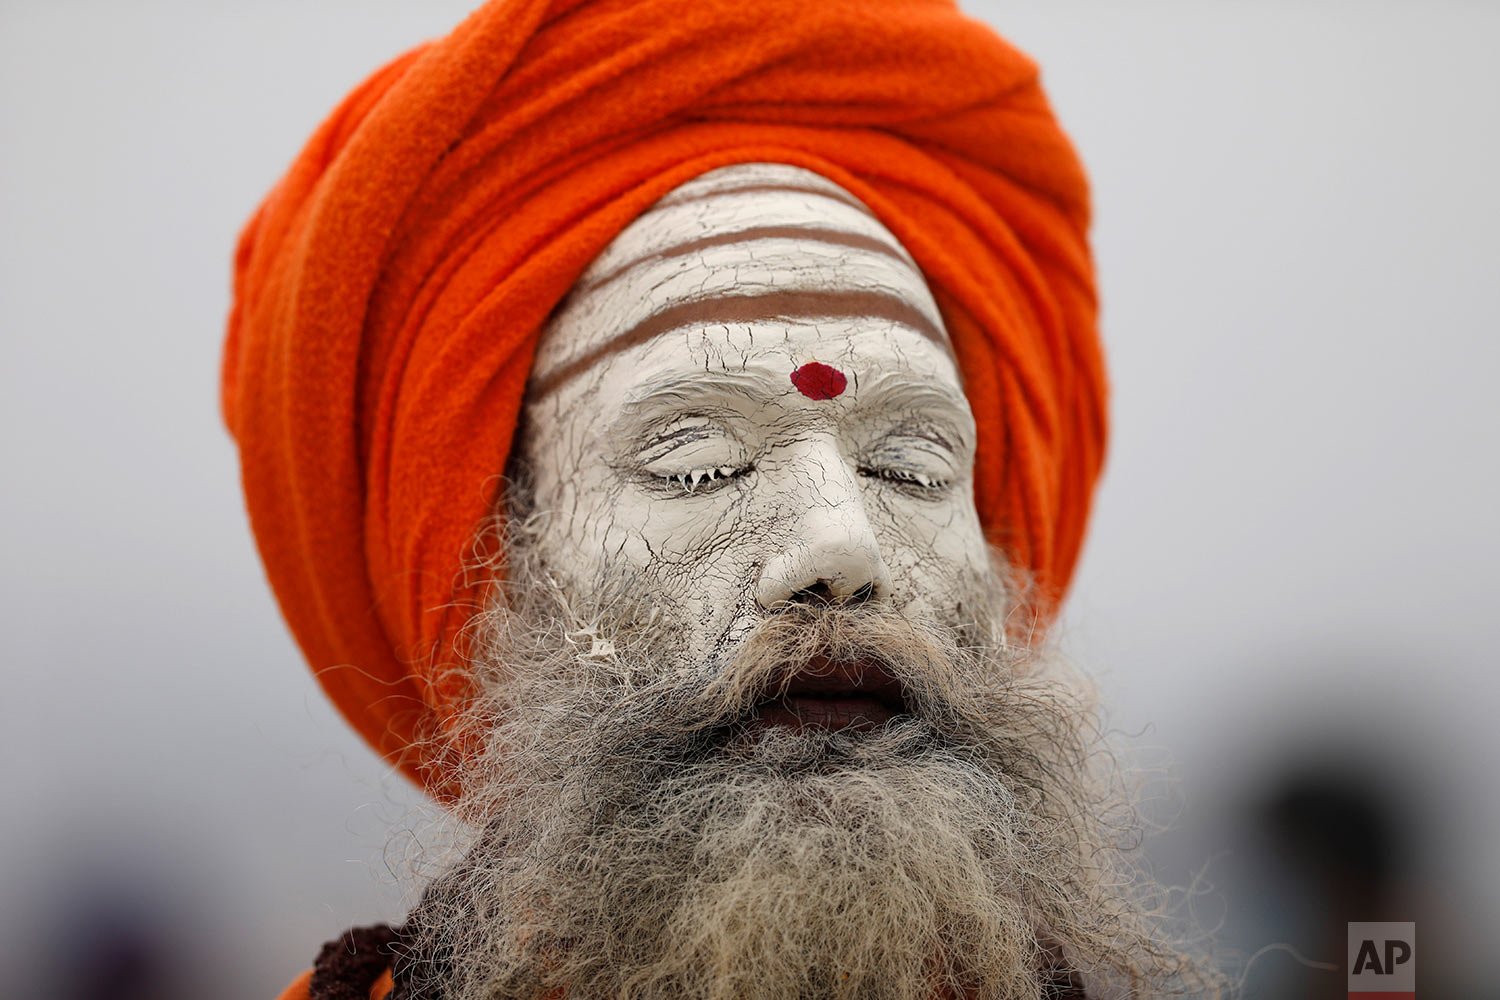  A Hindu holy man, performs rituals after taking holy dips at the Sangam, the confluence of three rivers — the Ganges, the Yamuna and the mythical Saraswati on the auspicious Paush Purnima day in Prayagaraj, India, Monday, Jan. 17, 2022. (AP Photo/Ra